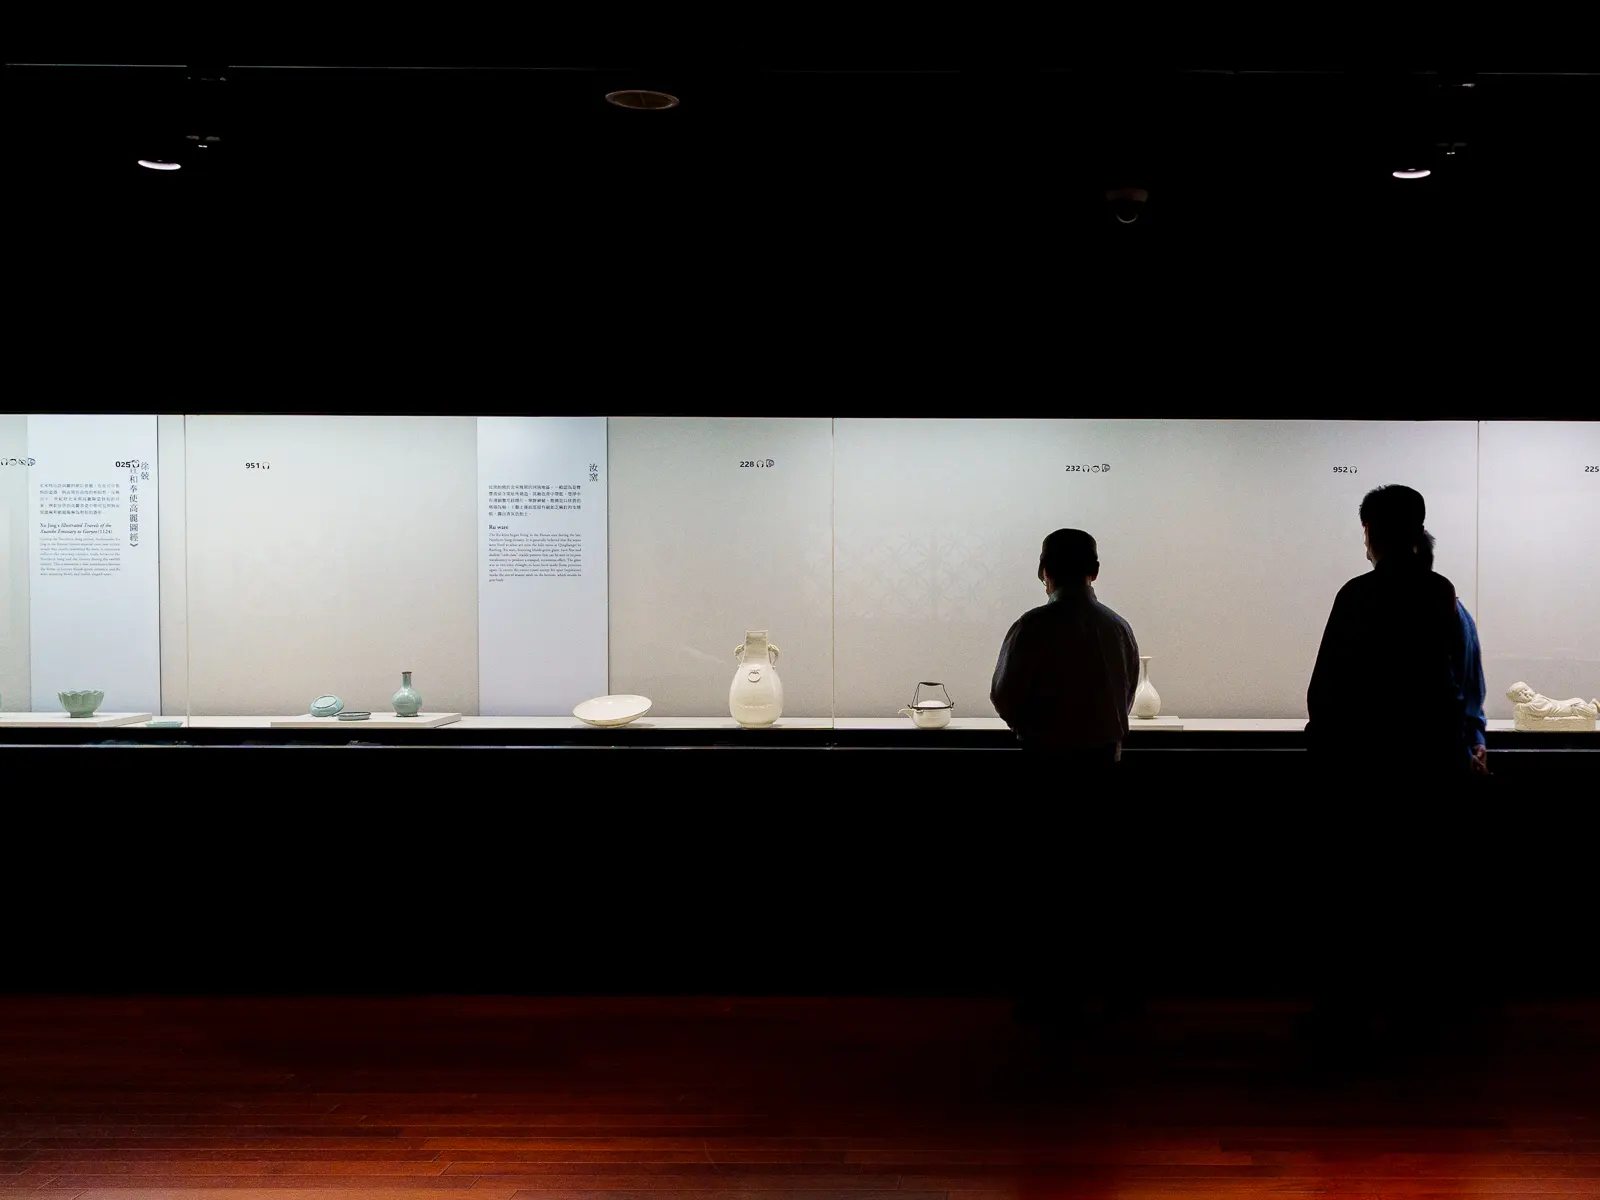 Two individuals observe white ceramic exhibits in a dimly lit museum gallery.